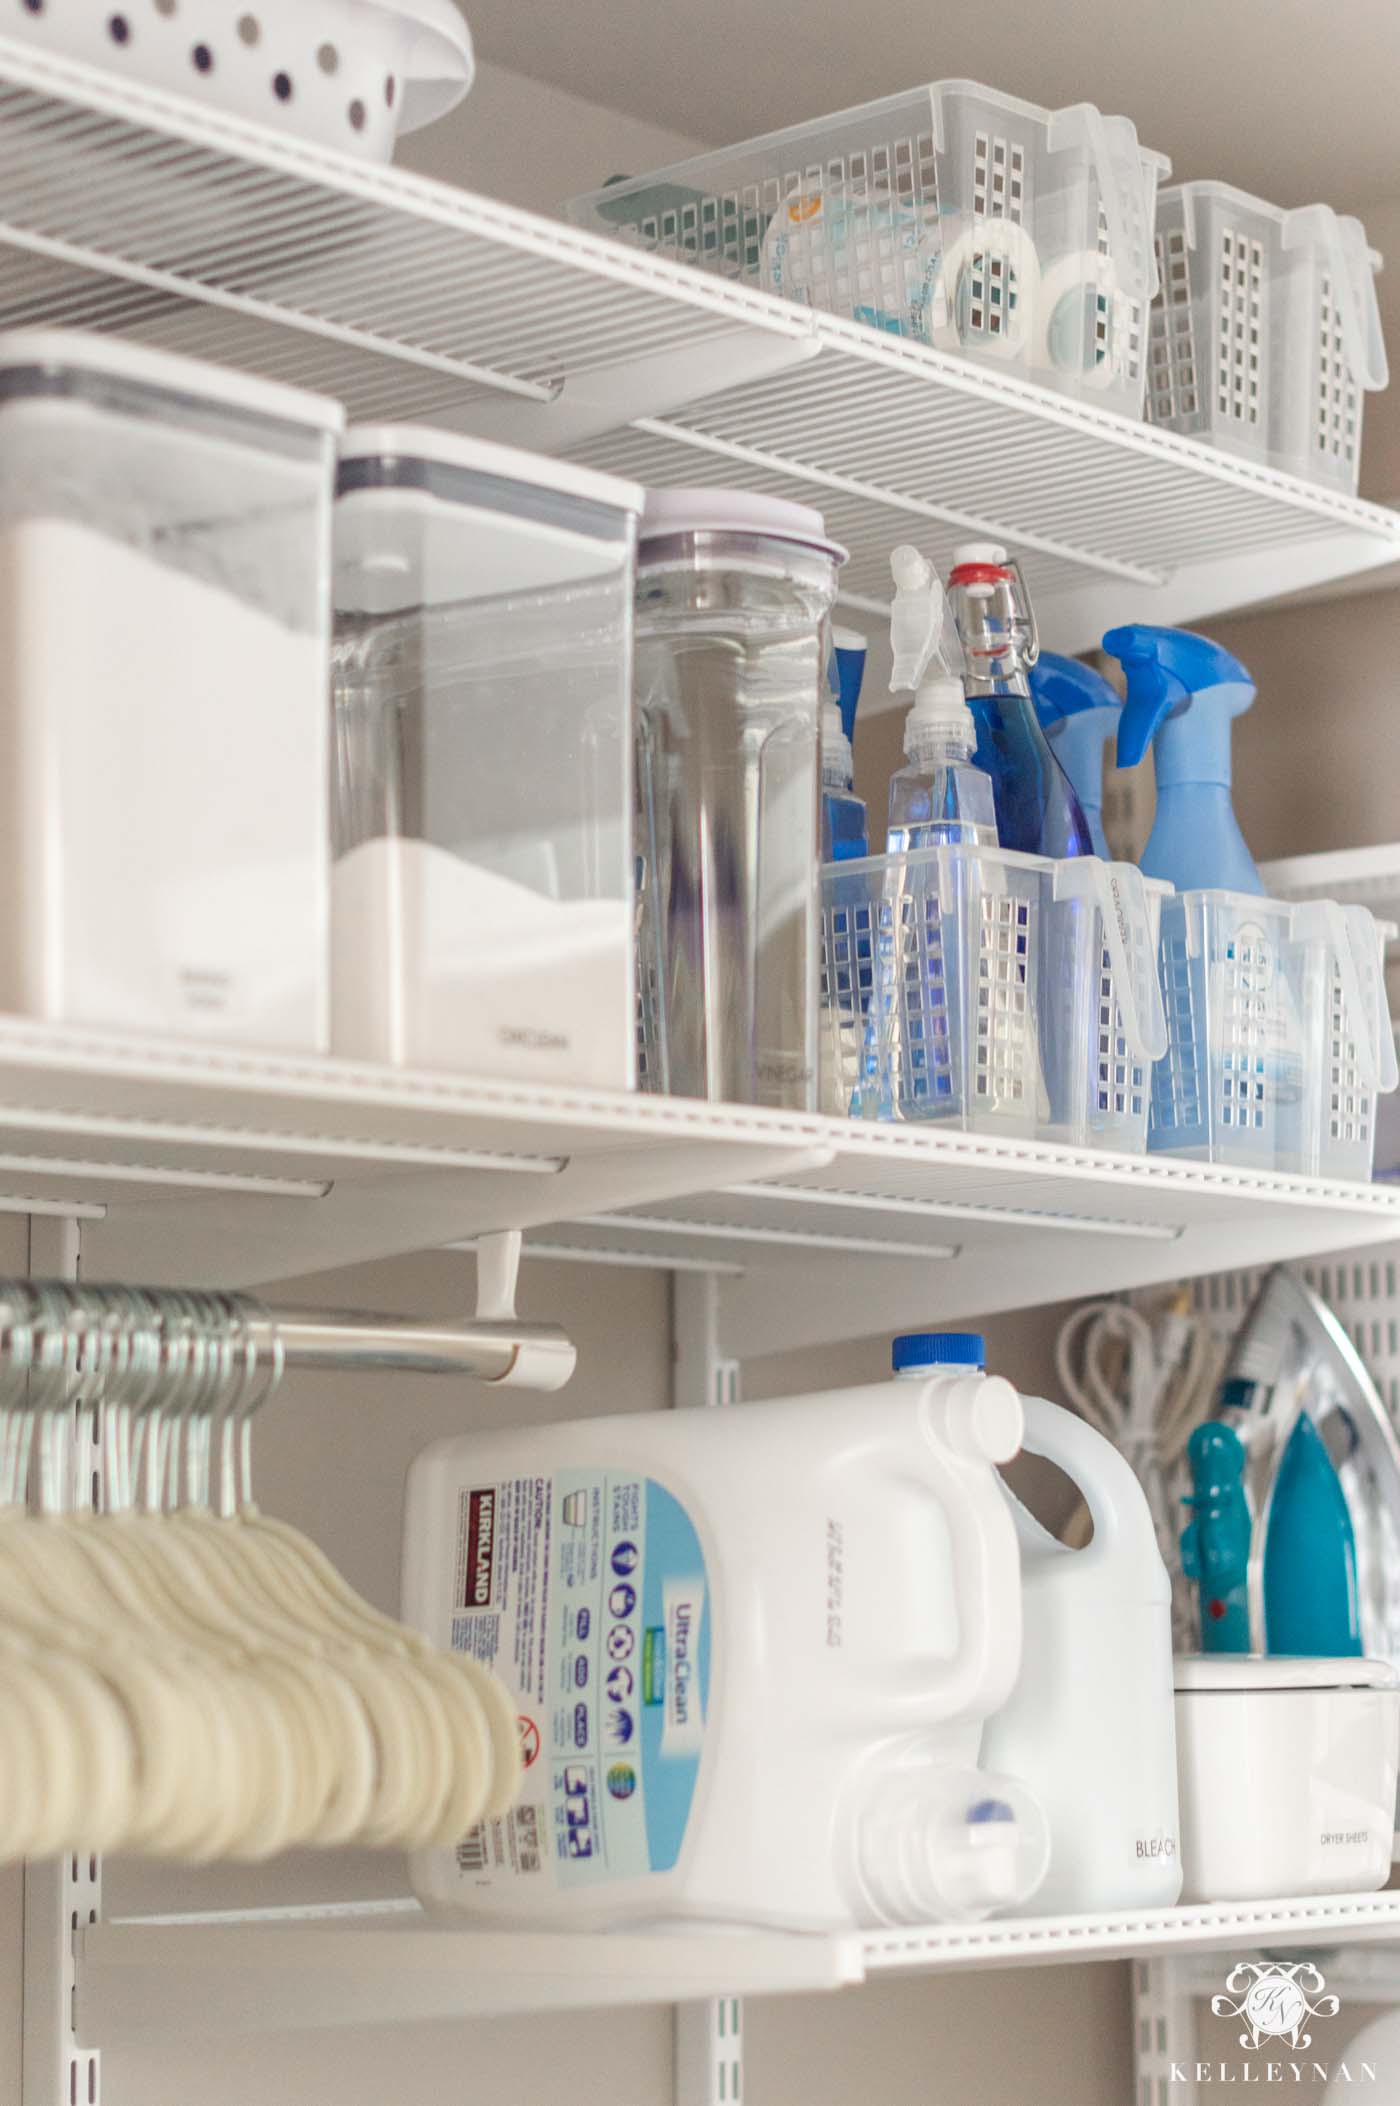 How to Organize a Small Laundry Room without Cabinets